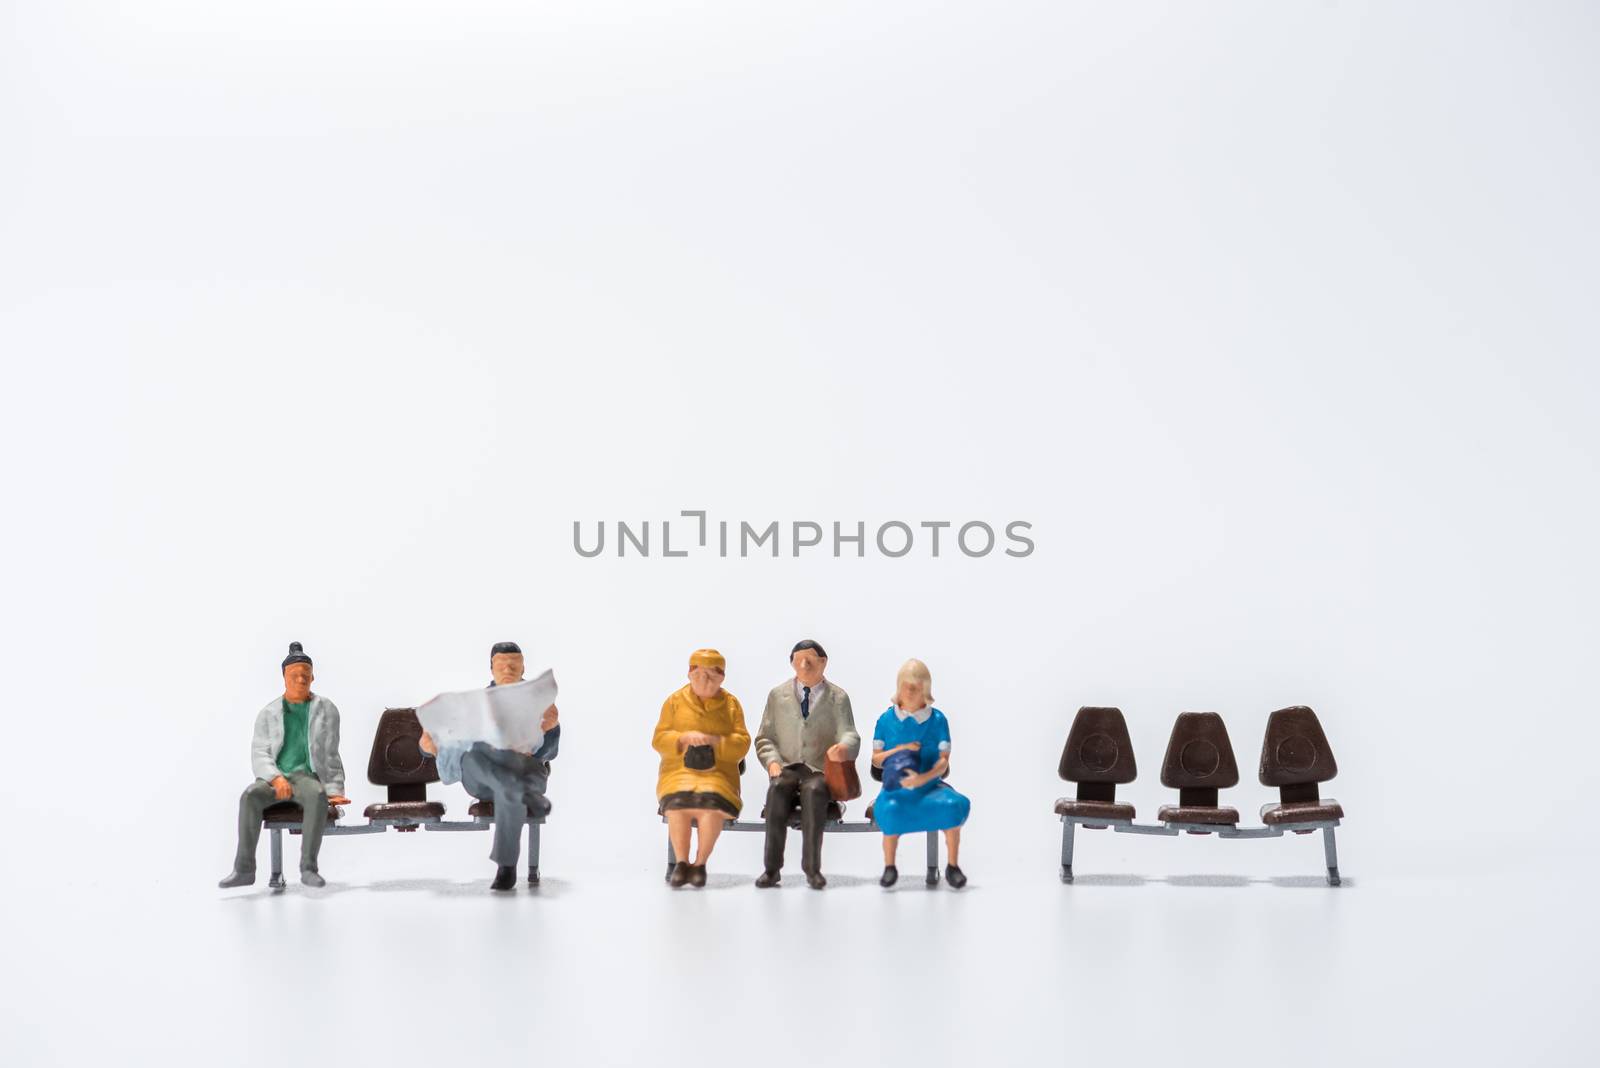 row of miniature people figure sitting on bench white background